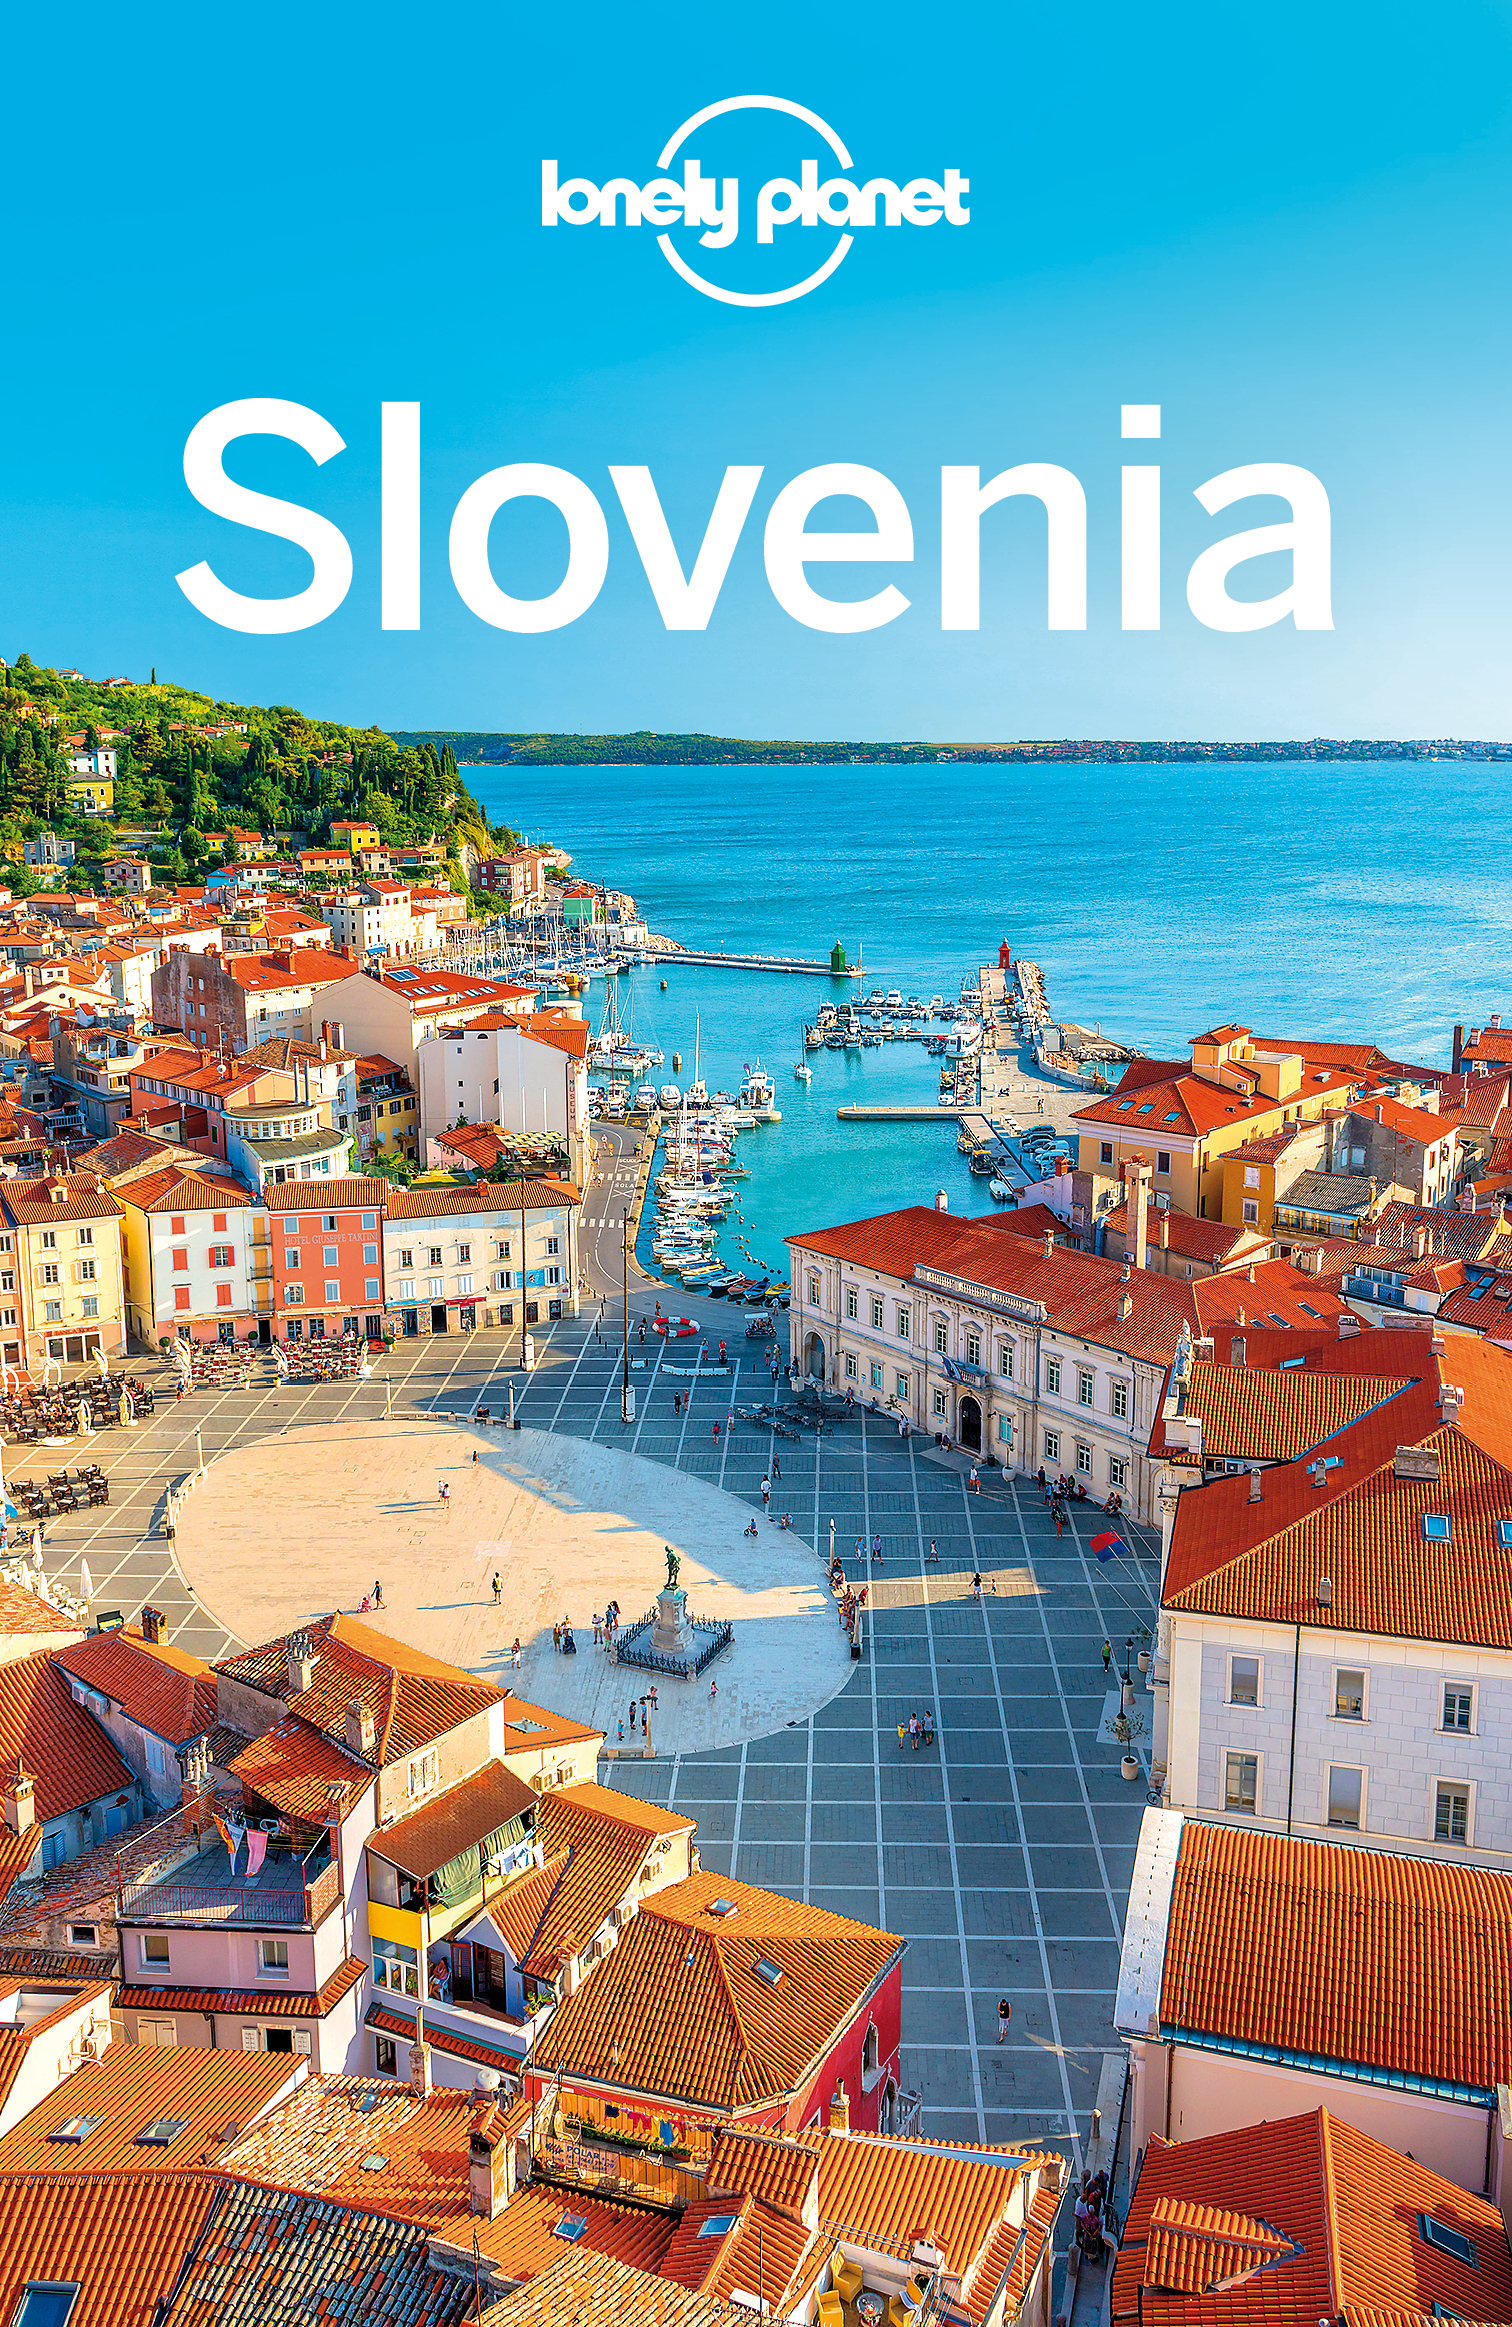 Lonely Planet Slovenia - image 1